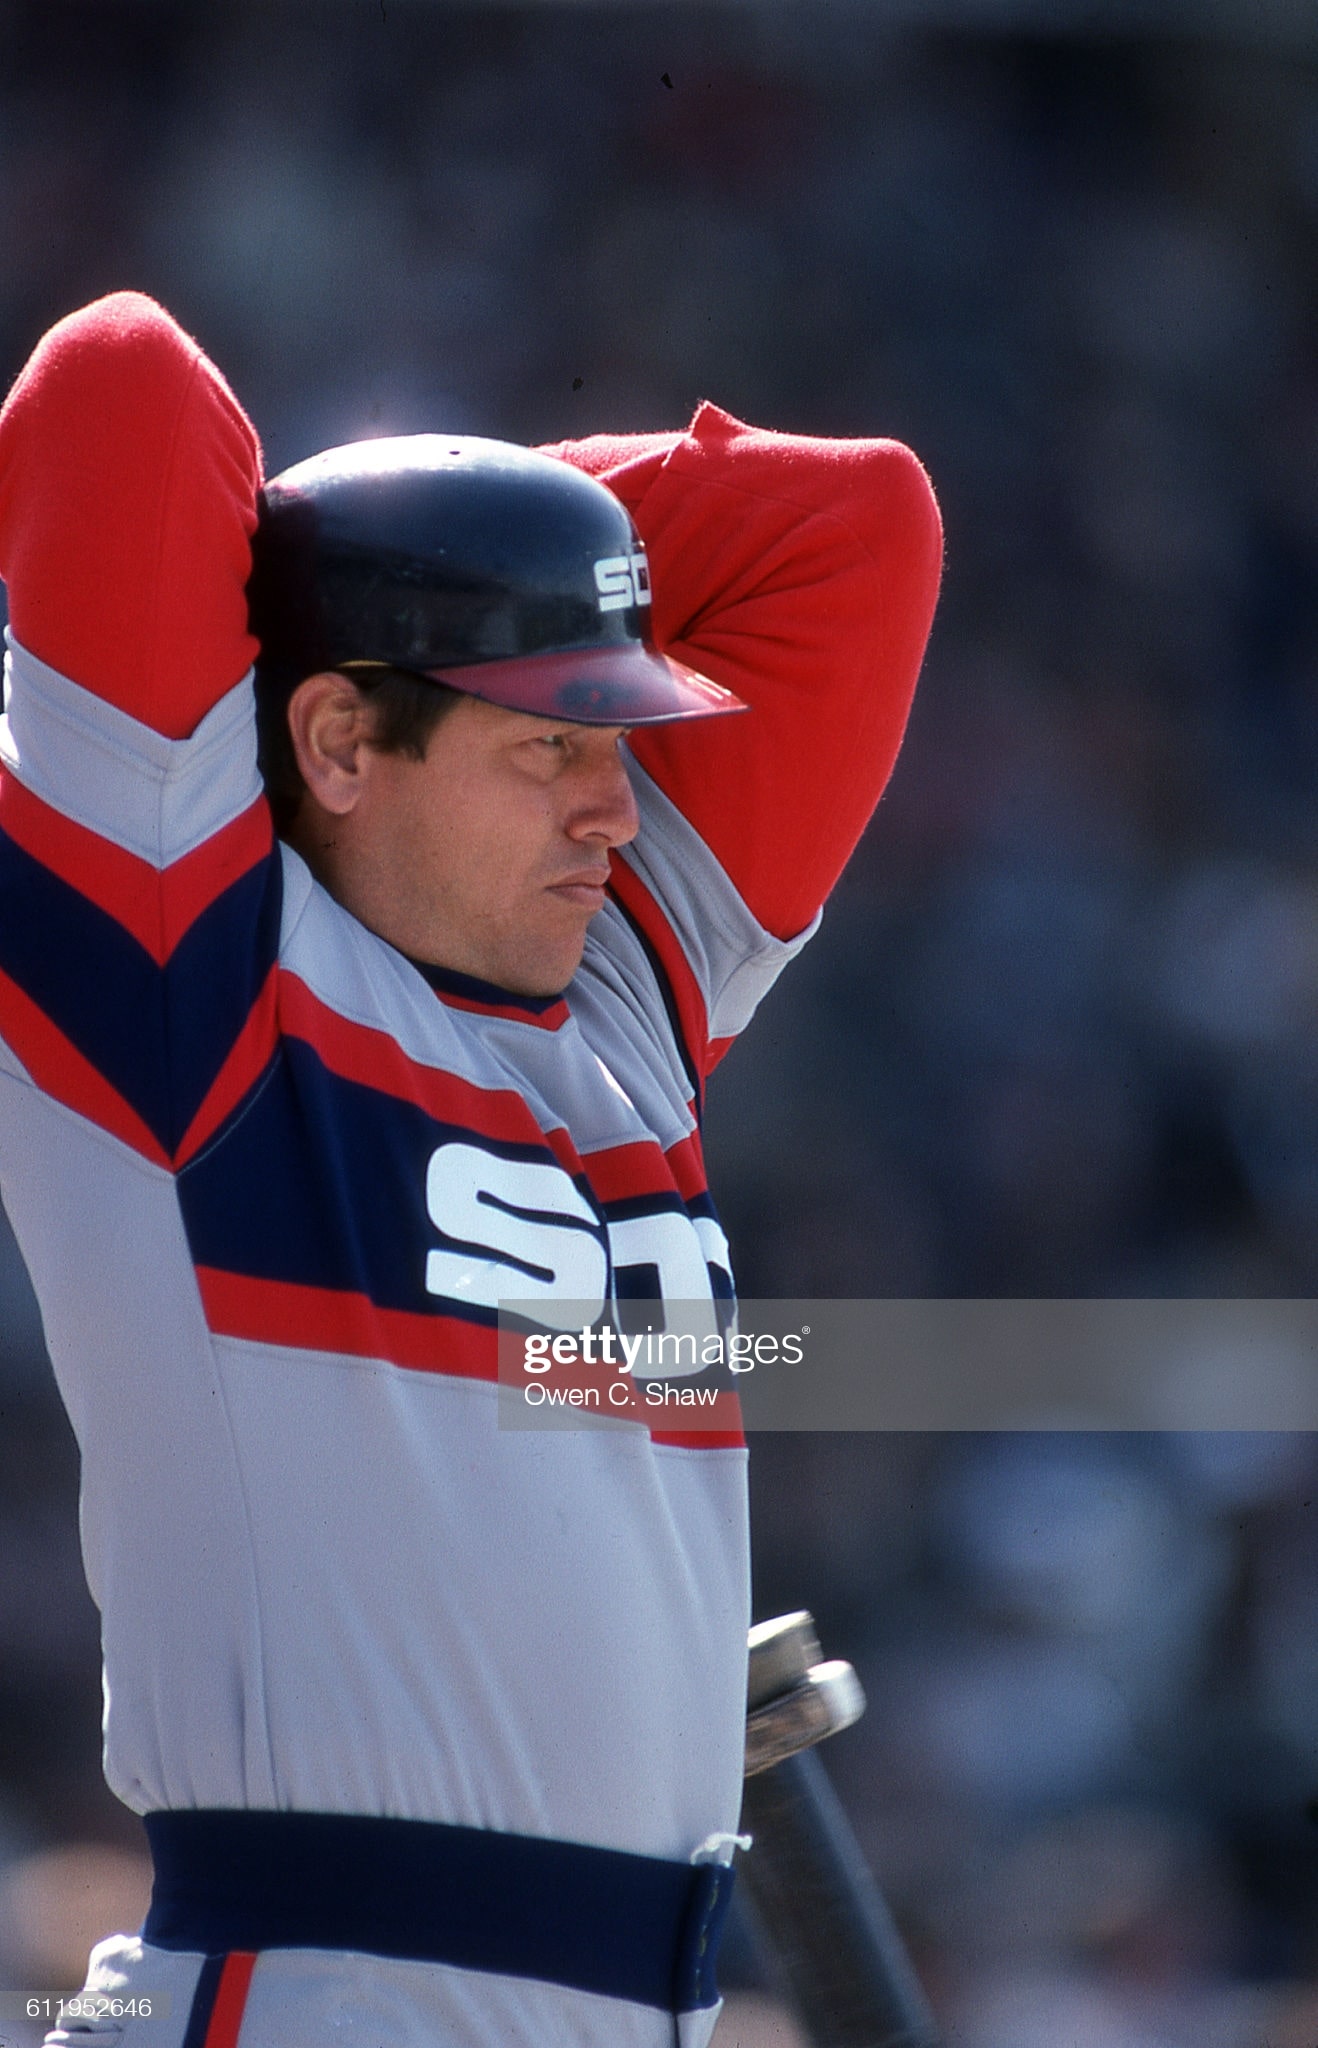 Carlton Fisk in the on deck circle